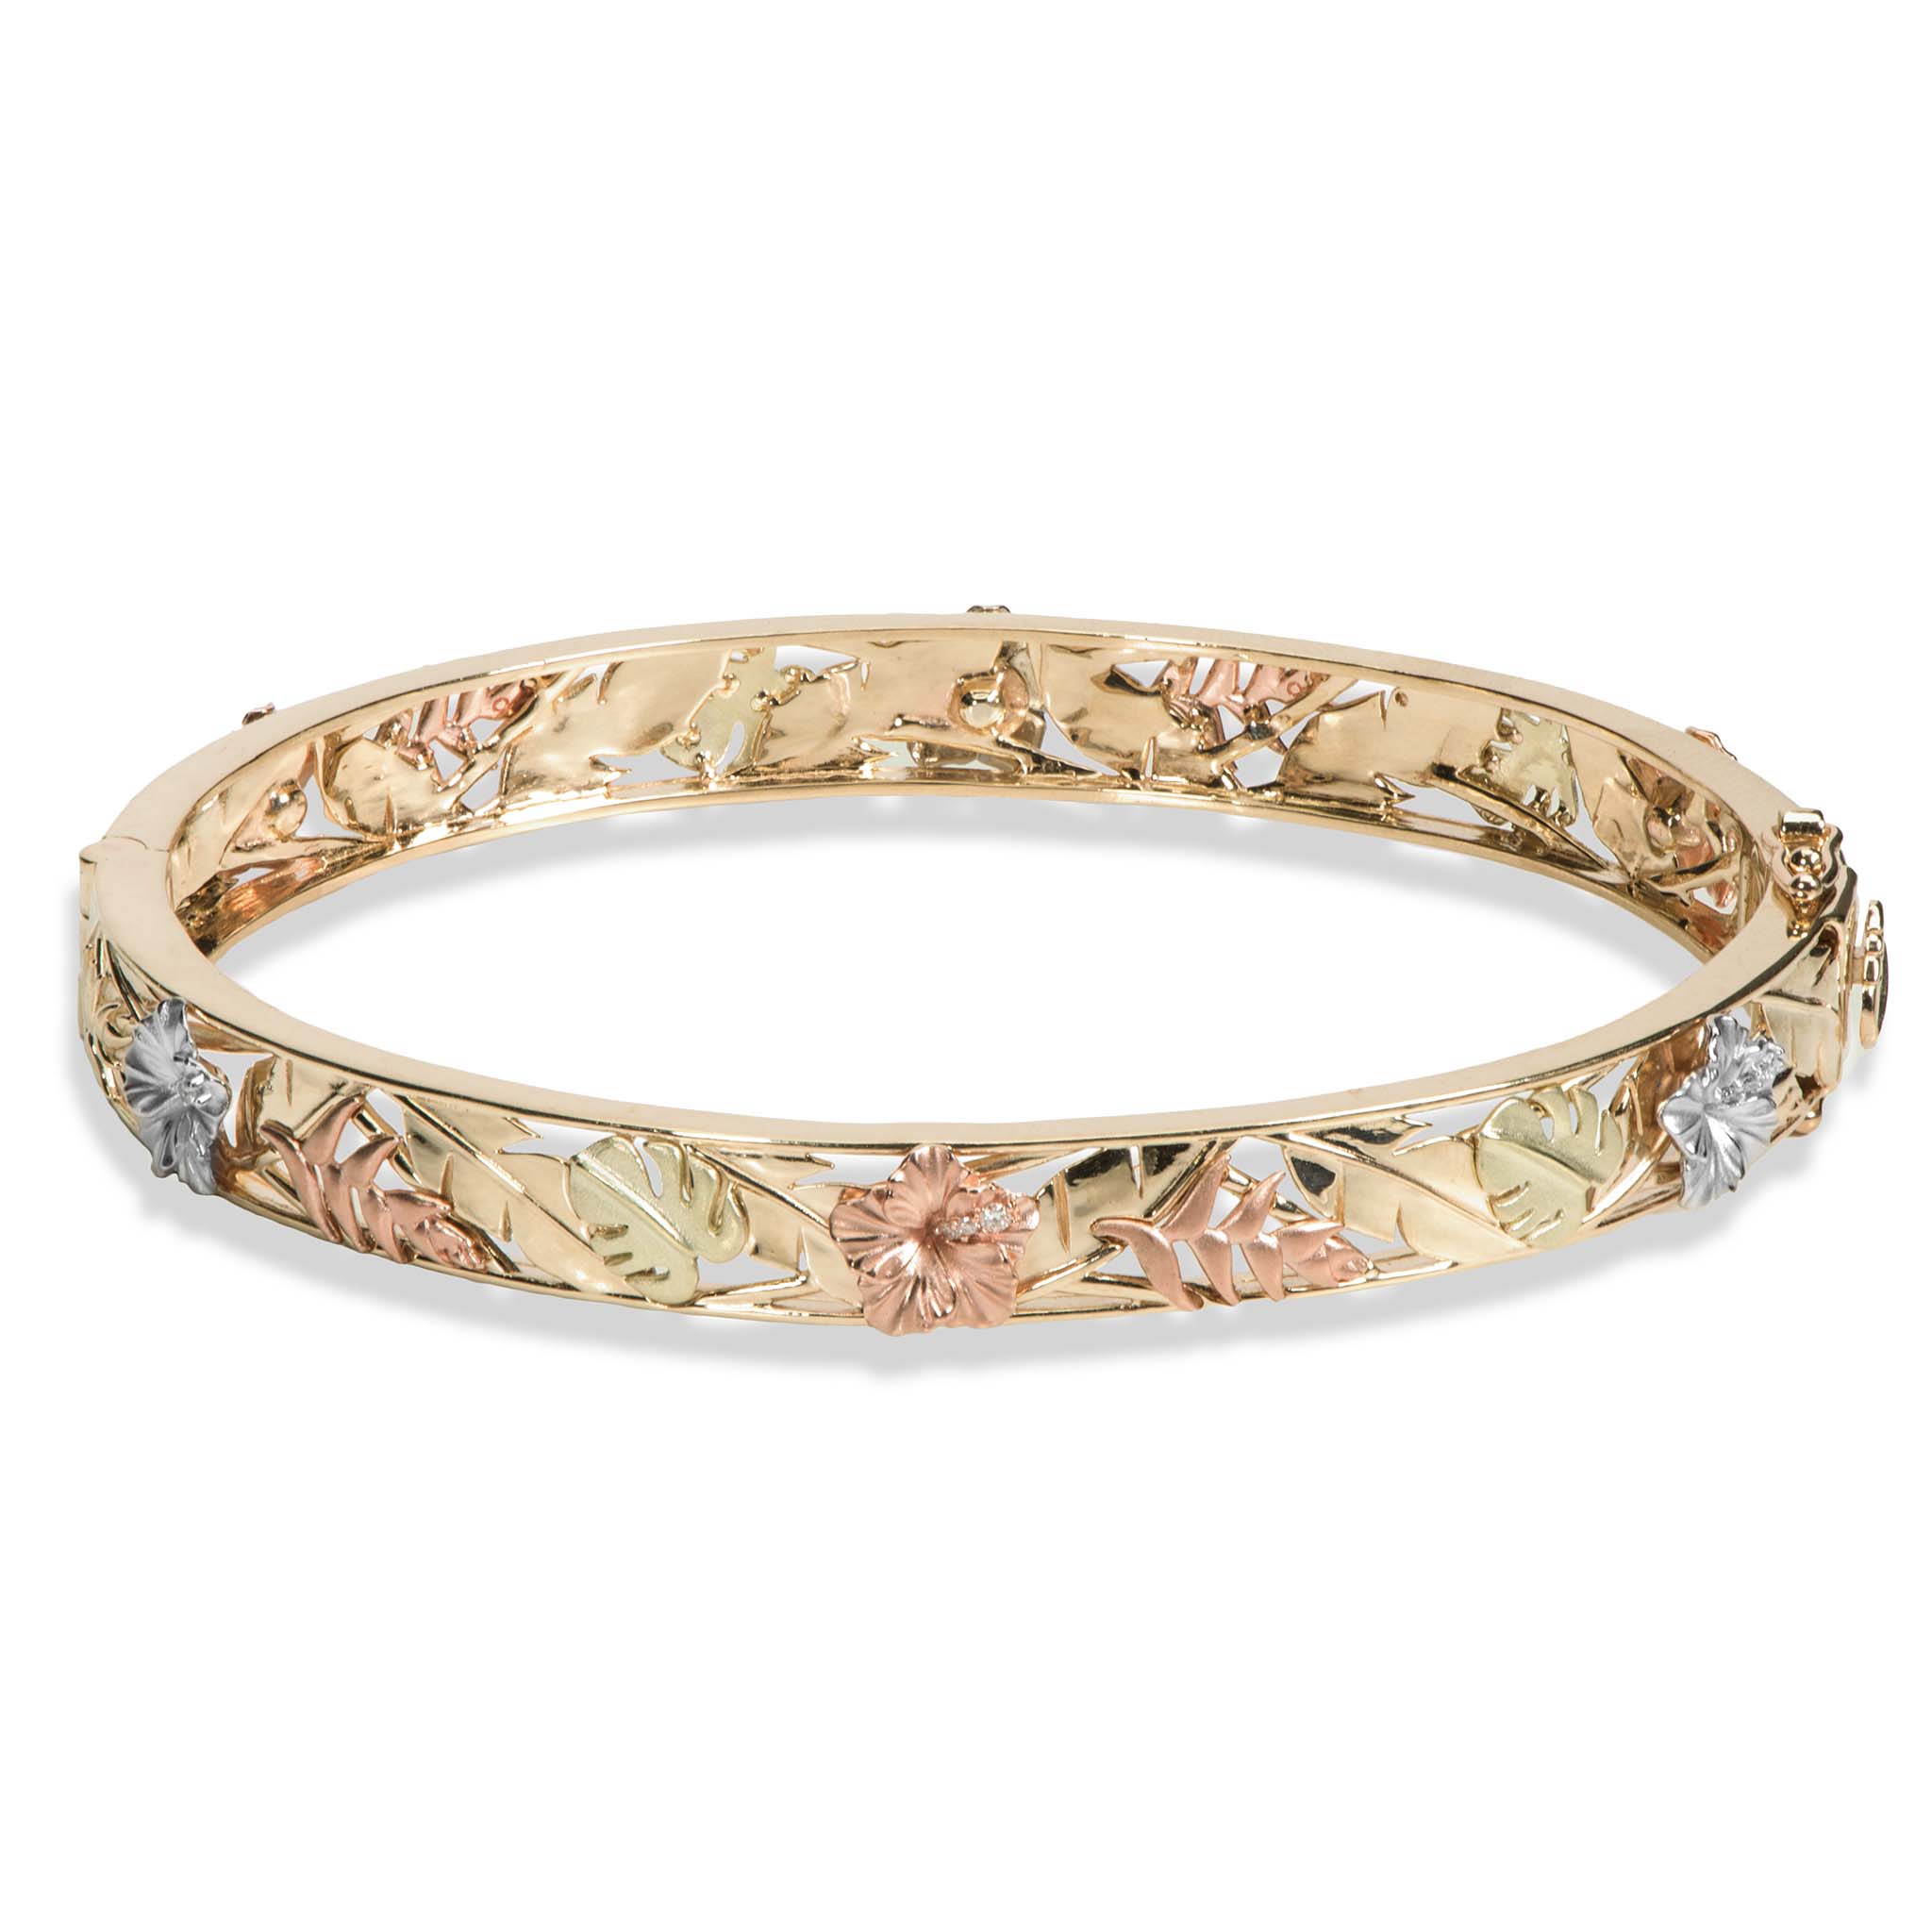 Hawaiian Gardens Hibiscus Bracelet in Multi Color Gold with Diamonds - 8mm - Size 7.5"